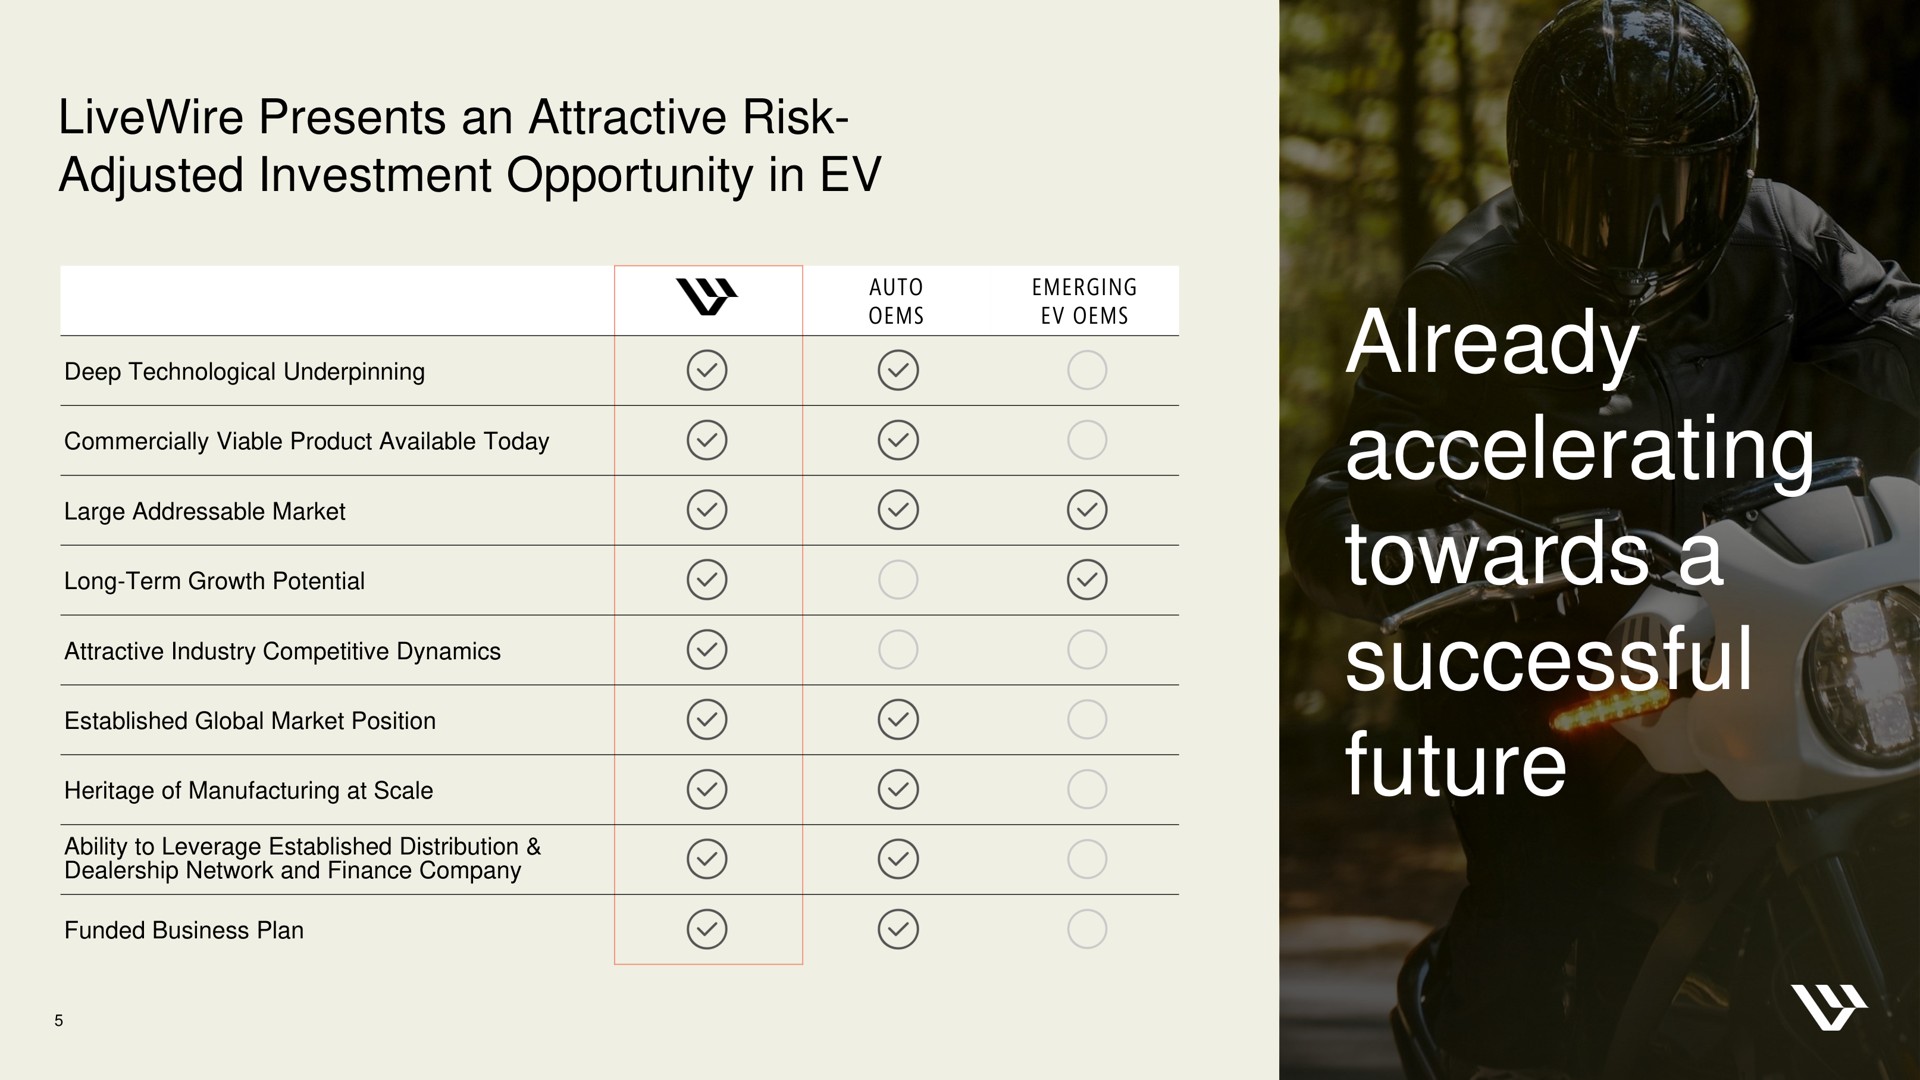 presents an attractive risk adjusted investment opportunity in already accelerating towards a successful future towards a | Harley Davidson